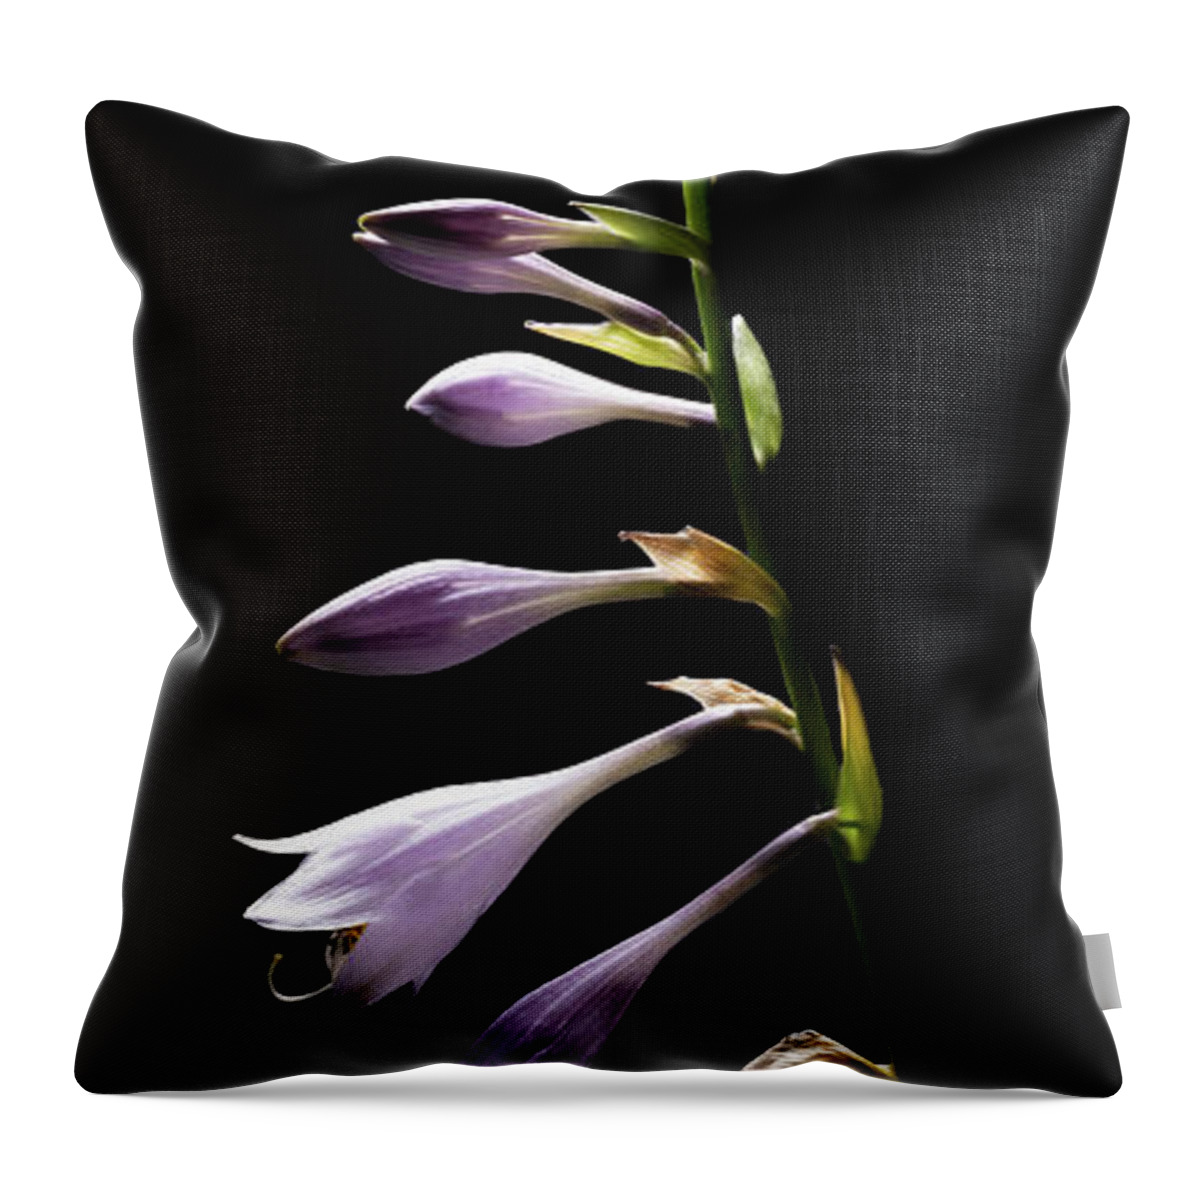 Blue Plantain Lily Throw Pillow featuring the photograph Blue Plantain Lily 2 by Kevin Suttlehan